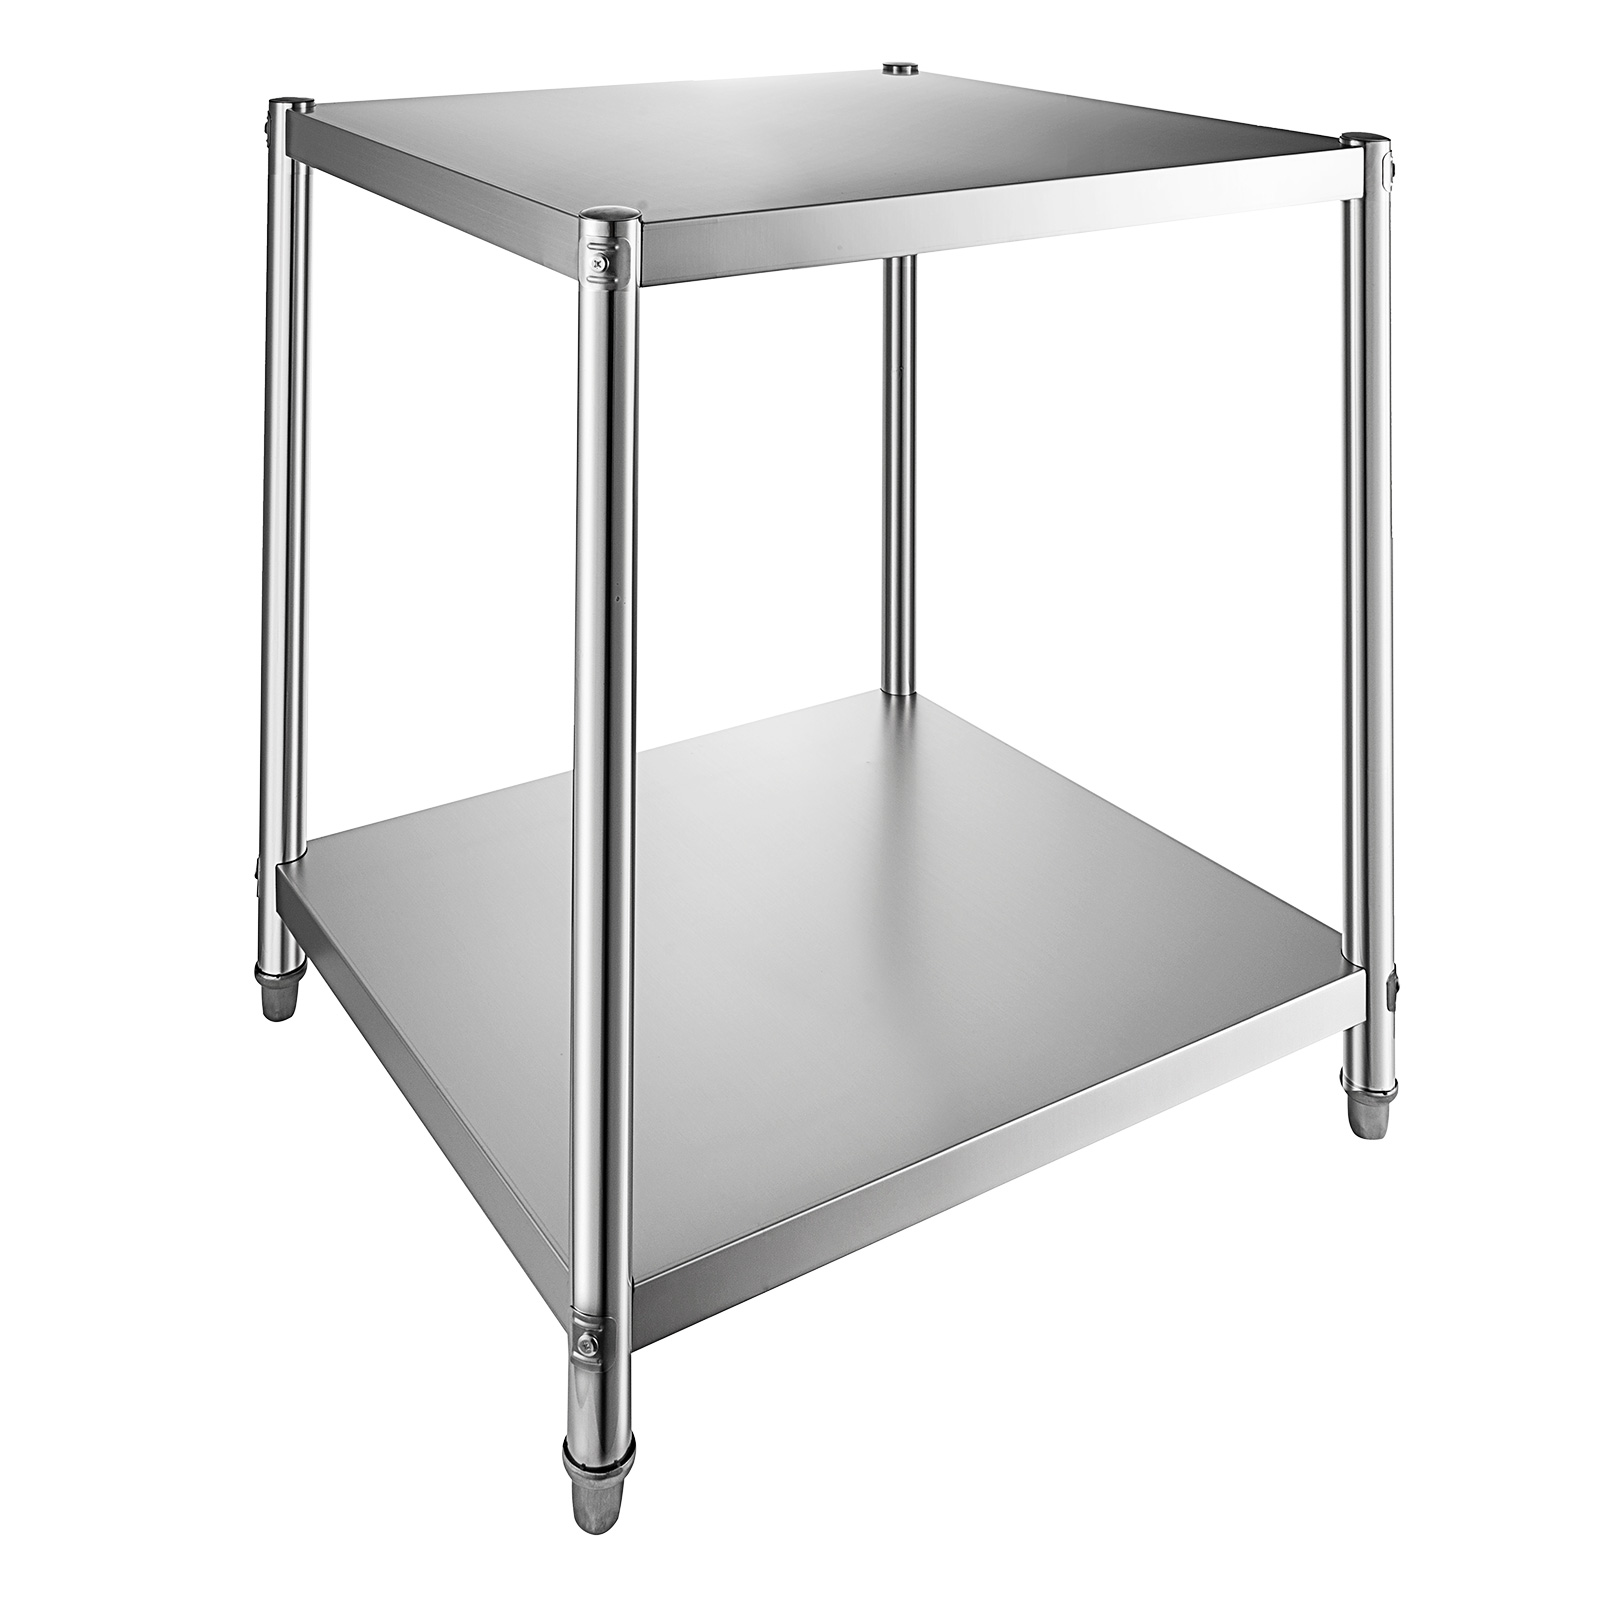 Stainless Steel Kitchen Work Prep Table Bench Commercial ...